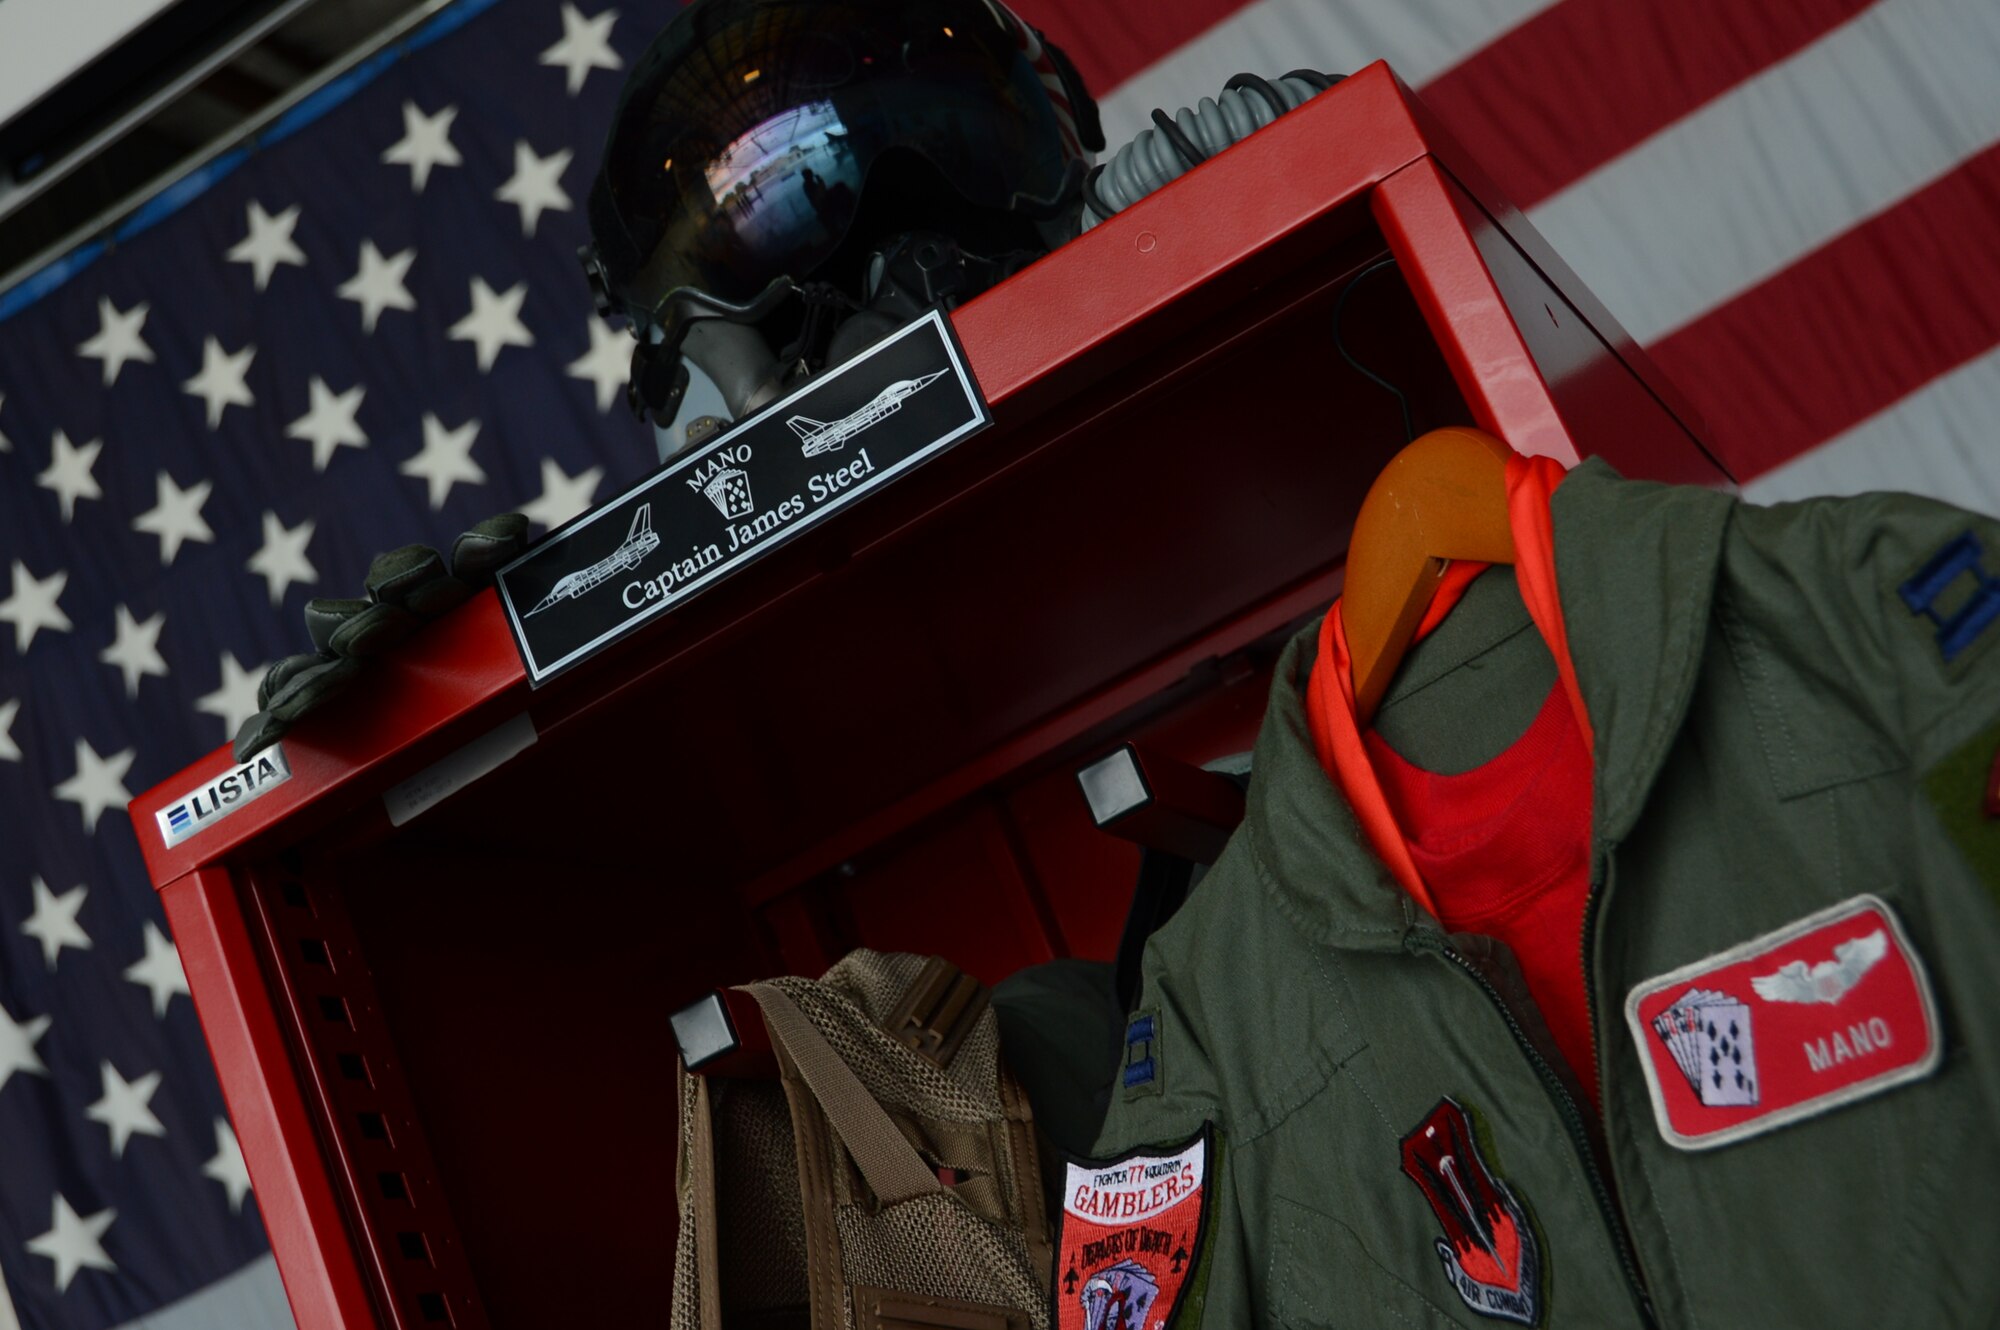 SHAW AIR FORCE BASE, S.C. - A locker containing items that represented U.S. Air Force Capt. James Steel and his career were displayed during his memorial service in Hangar 1200 at Shaw Air Force Base, S.C., April 30, 2013. Steel, a member of the 77th Fighter Squadron was killed when his F-16 Fighting Falcon crashed during combat maneuvers in Afghanistan April 3, 2013. More than 500 people attended the memorial. (U.S. Air Force photo by Master Sgt. Cohen A. Young/Released)